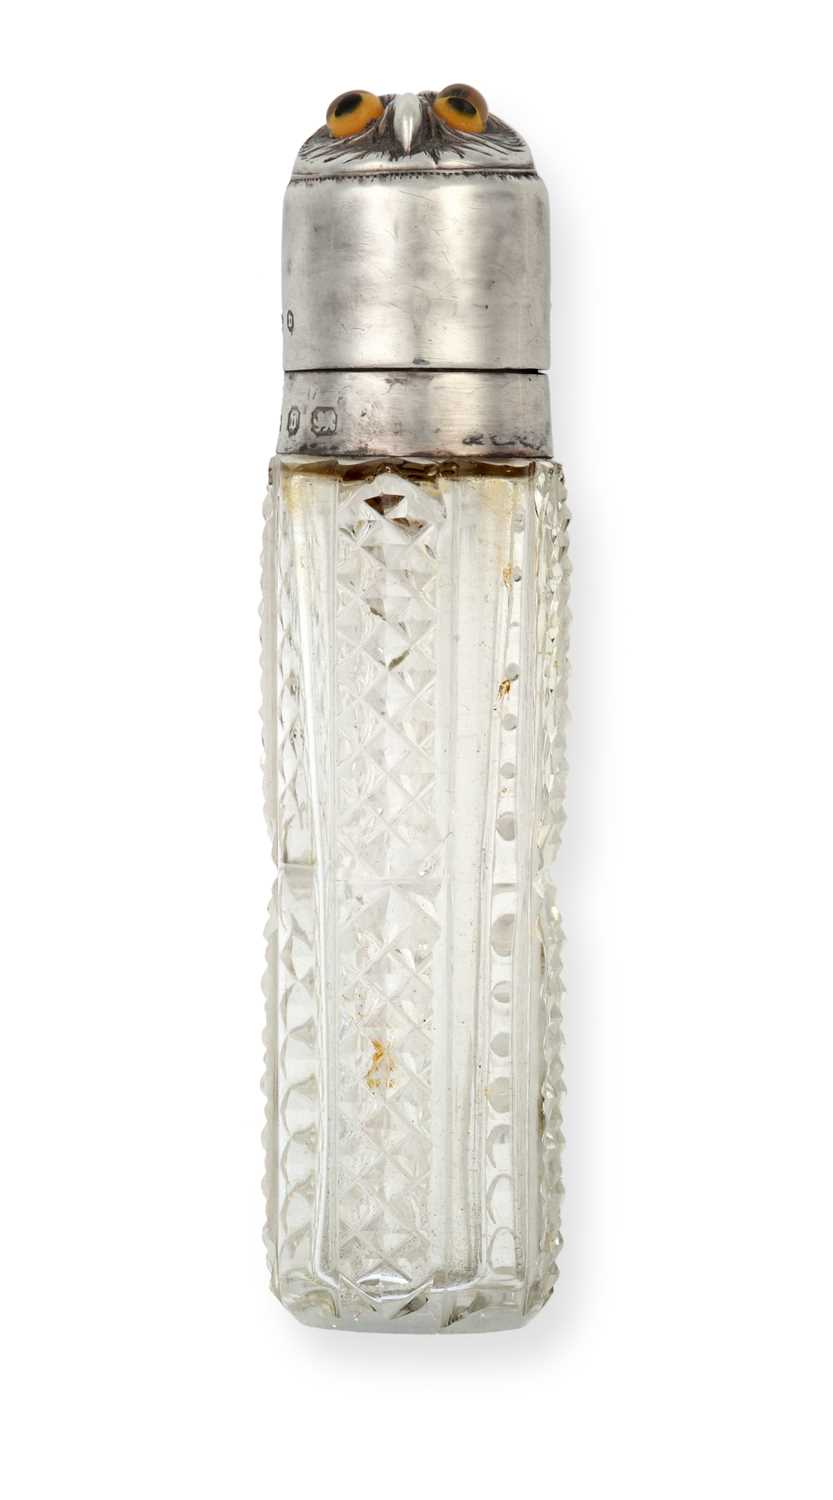 Lot 2058 - A Victorian Silver-Mounted Cut-Glass Scent-Bottle